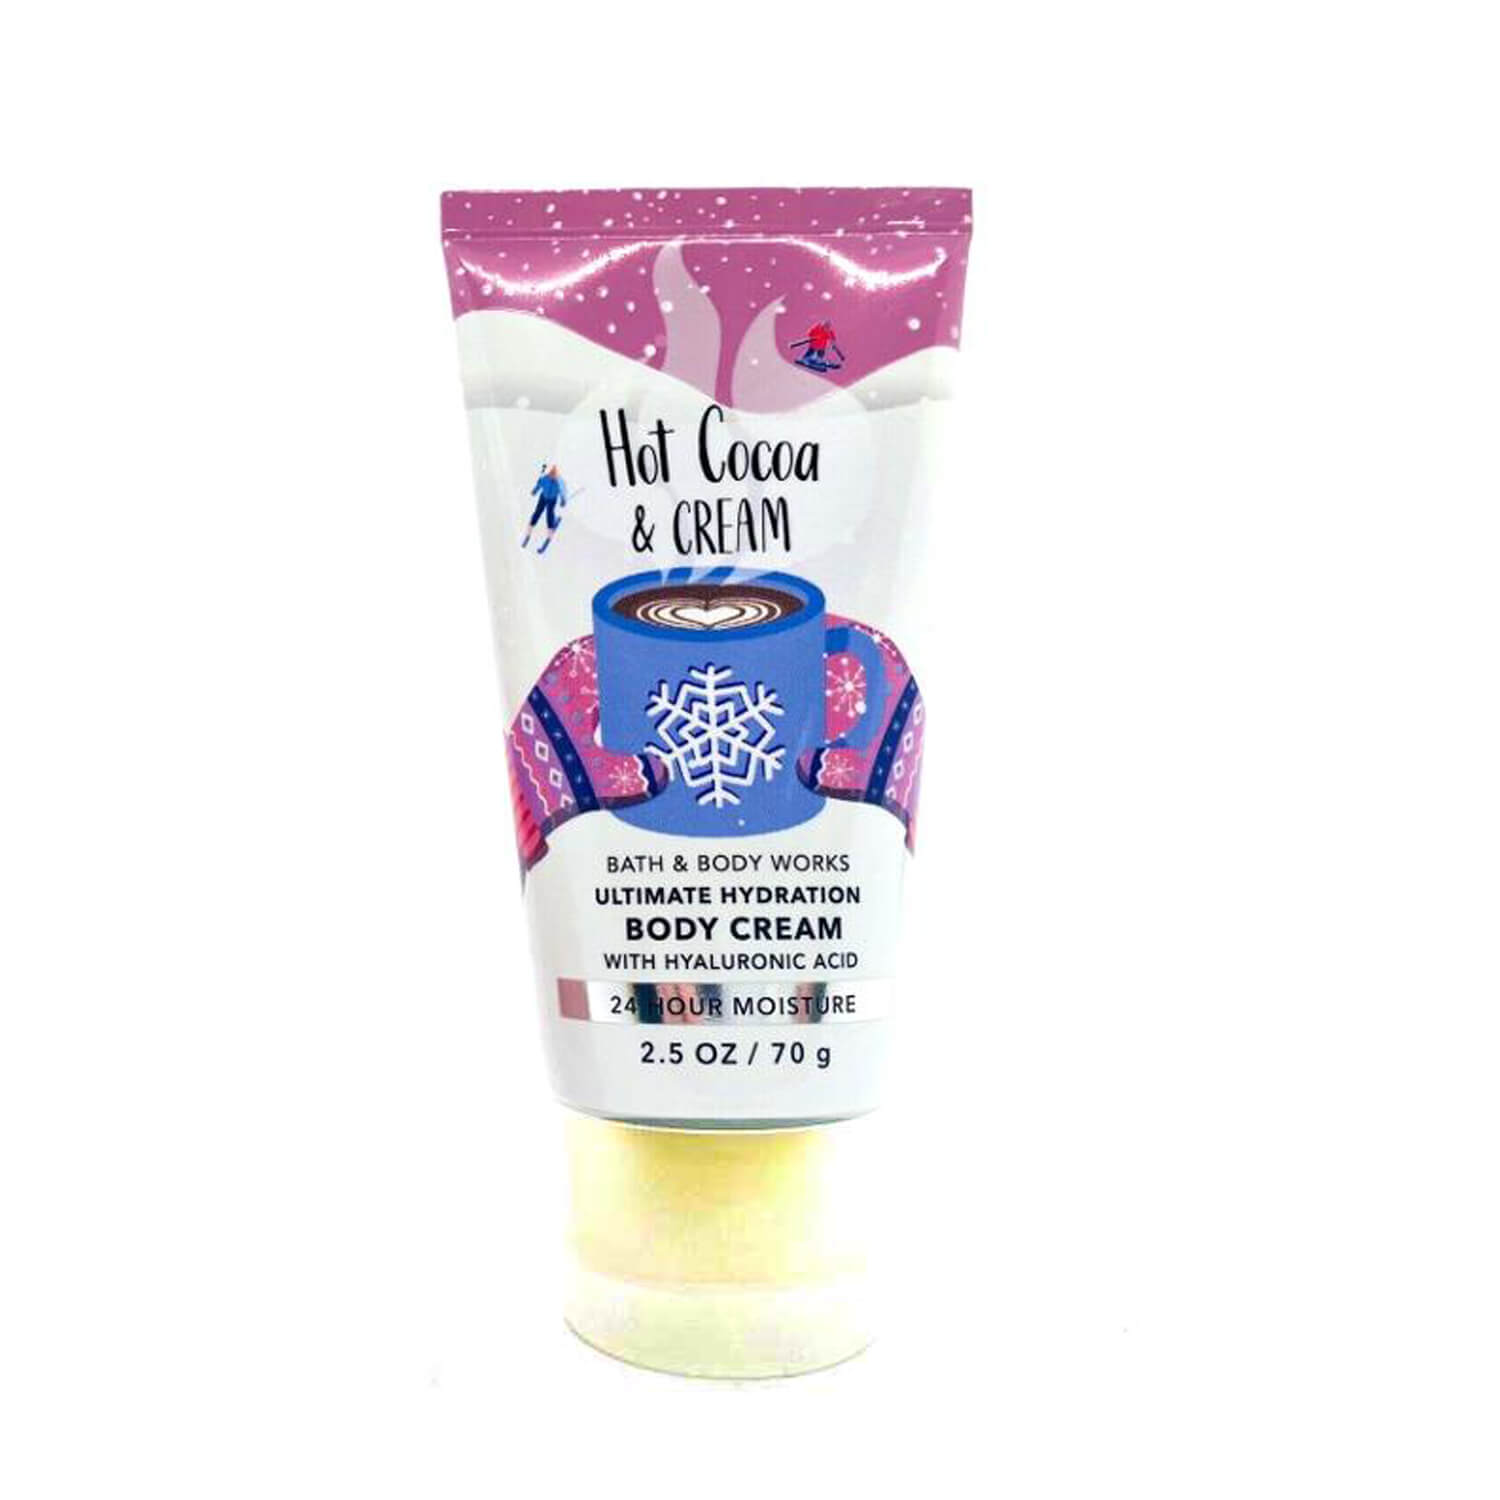 bath and body works travel size body cream hot cocoa available at heygirl.pk for delivery in Pakistan